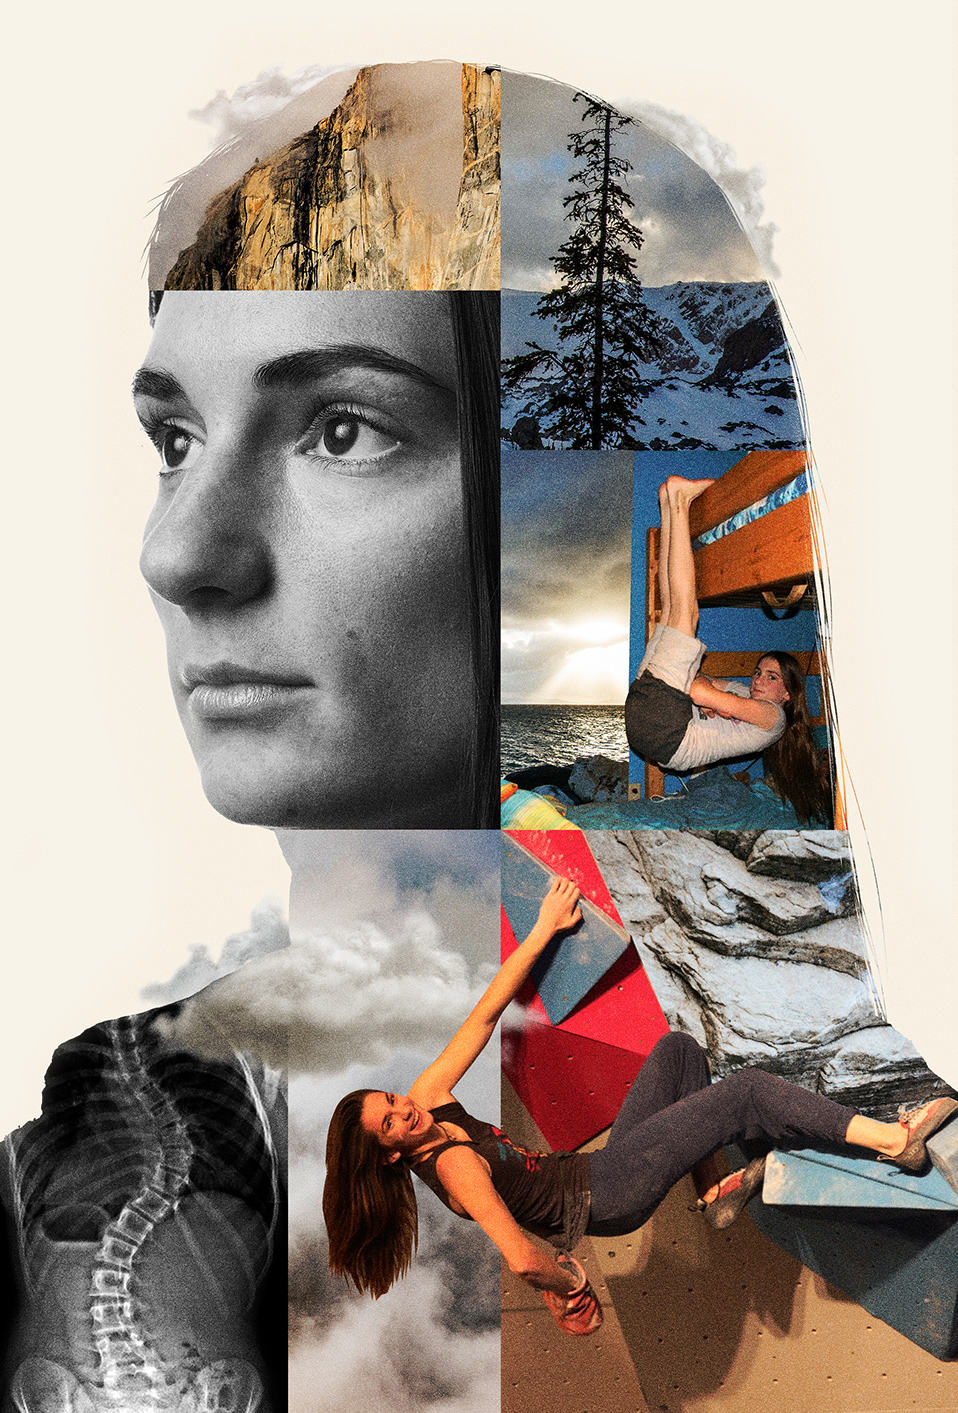 portrait of Kyra Condie with a compilation of images of Kyra climbing, Kyra hanging from a bunk bed as a child, an x-ray of her scoliosis and trees, clouds and mountain landscape. 